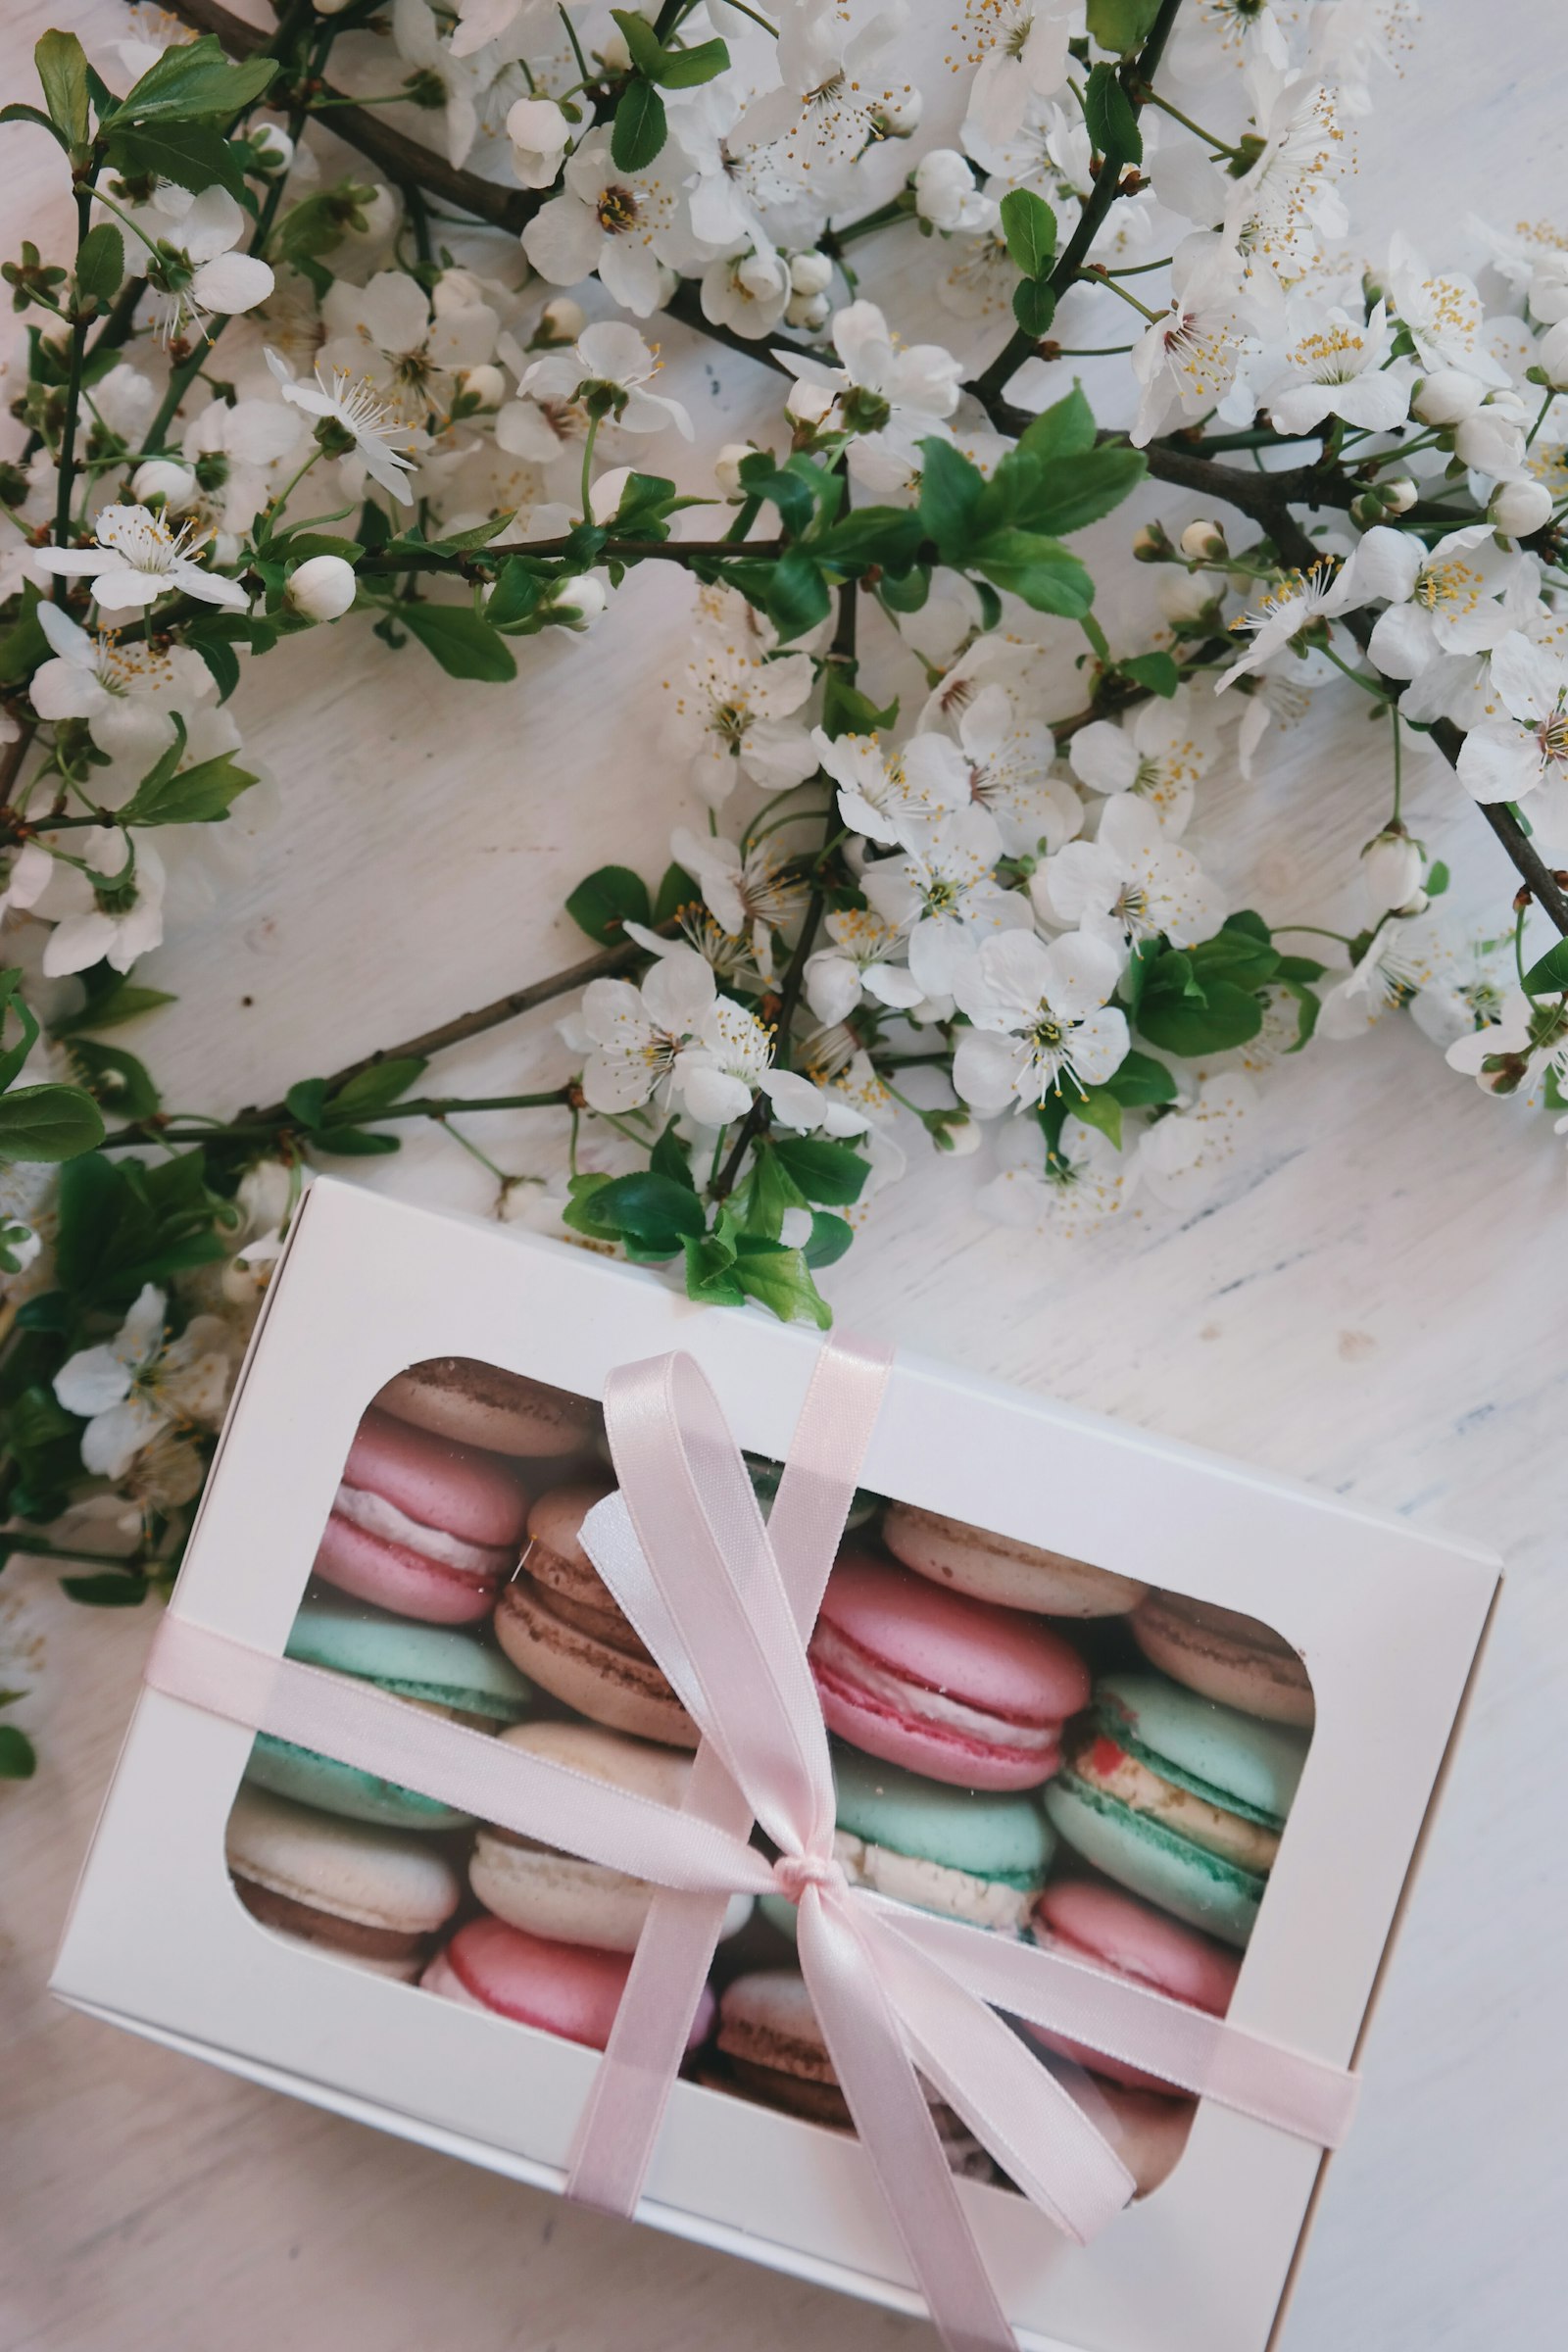 Samsung NX300 sample photo. French macarons in white photography